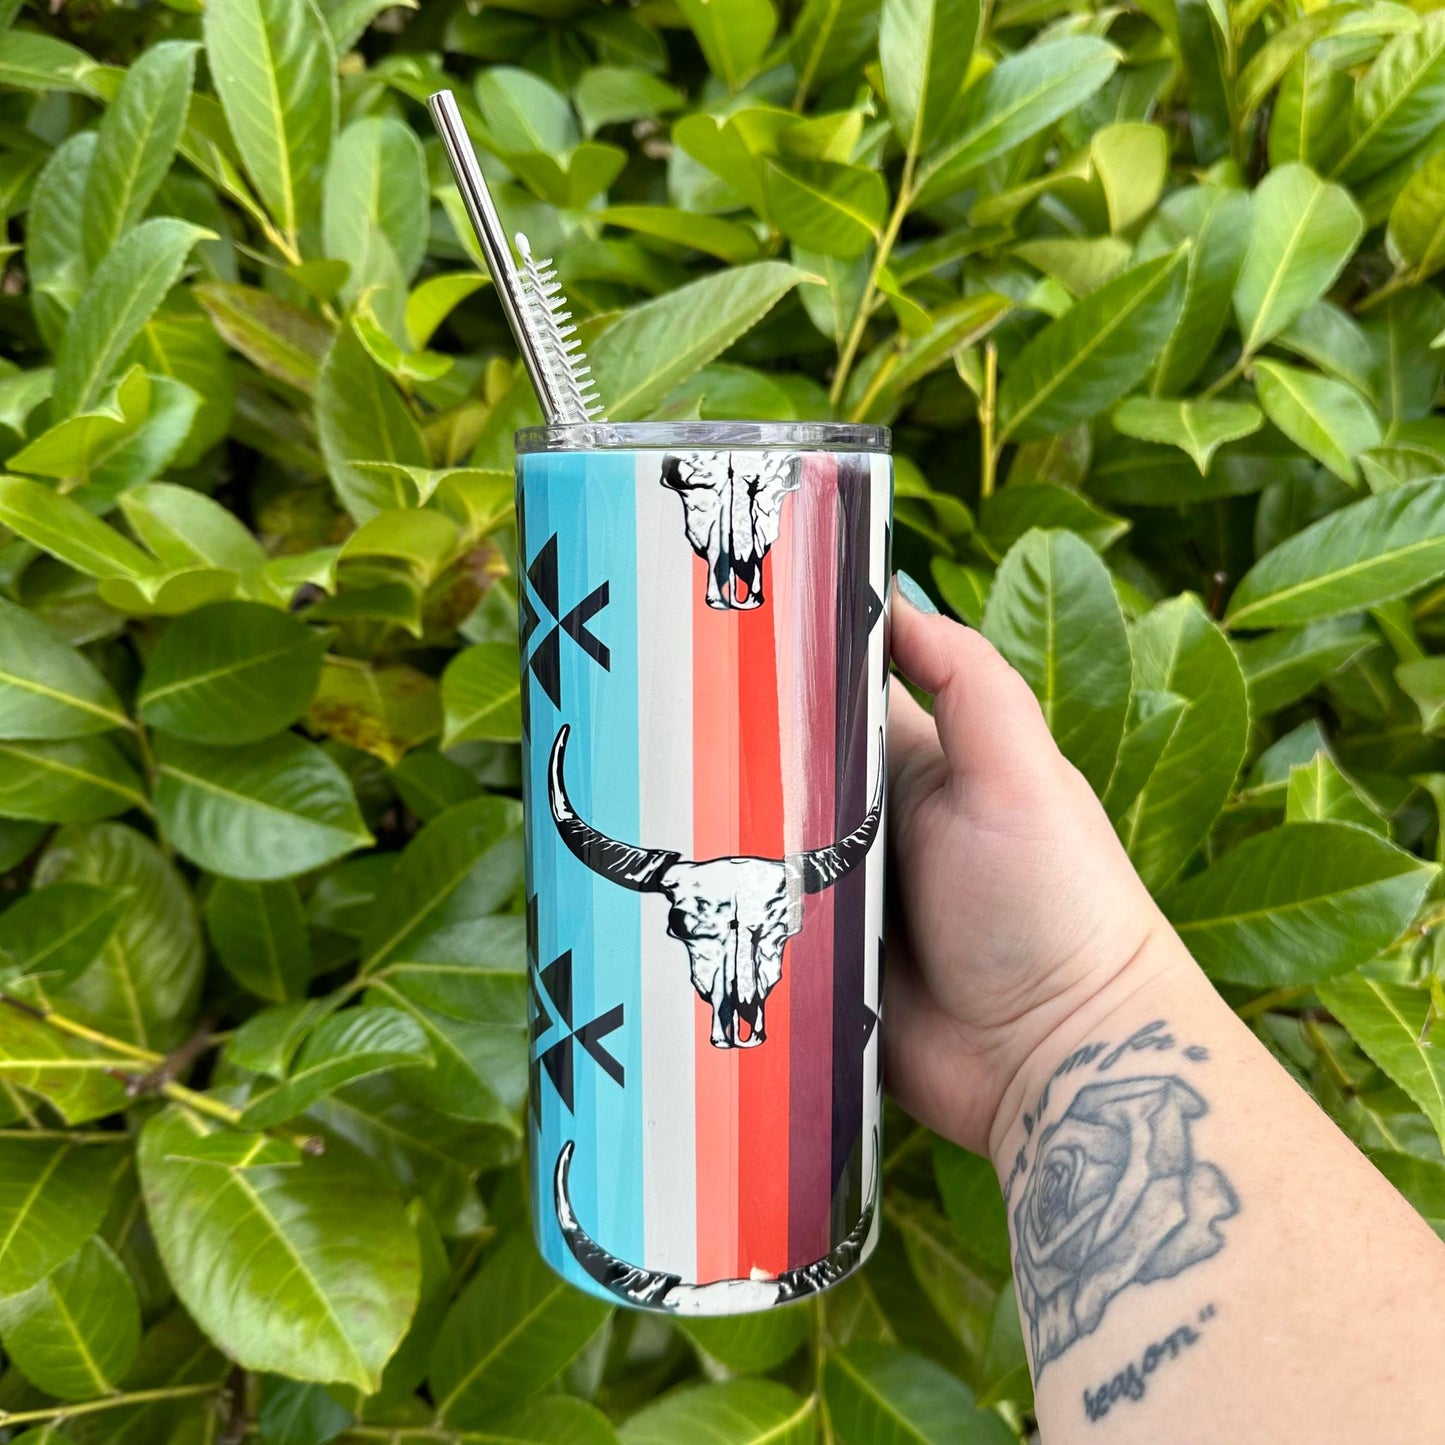 22oz Thick Tumbler w/ Metal Straw and Straw Cleaner